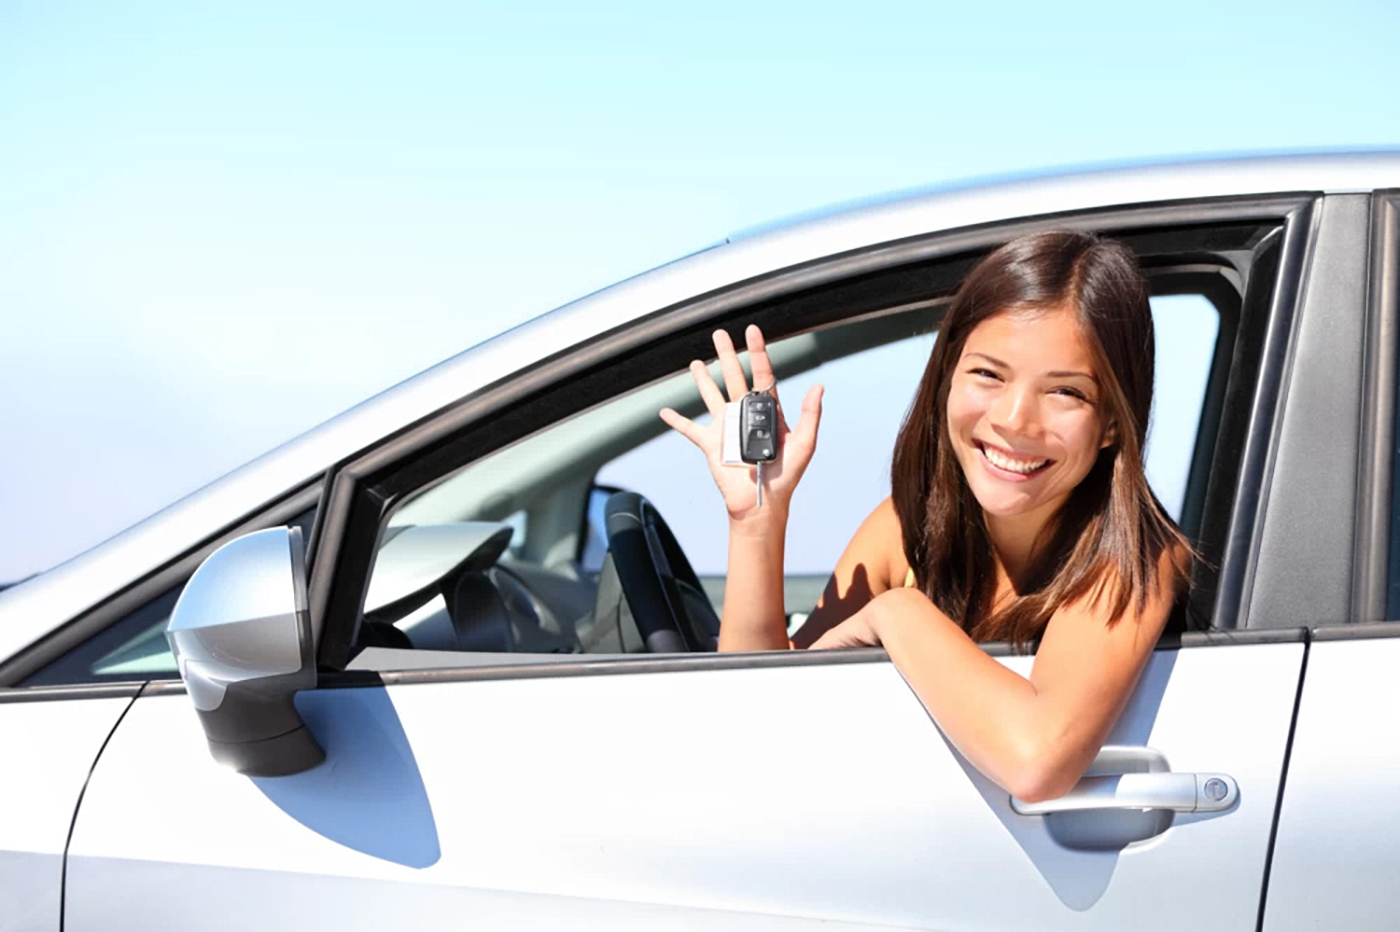 A young, smiling woman with brown hair looking out the driver's rolled down window of a white car with the car's key fob ring around one of the fingers of her right hand.